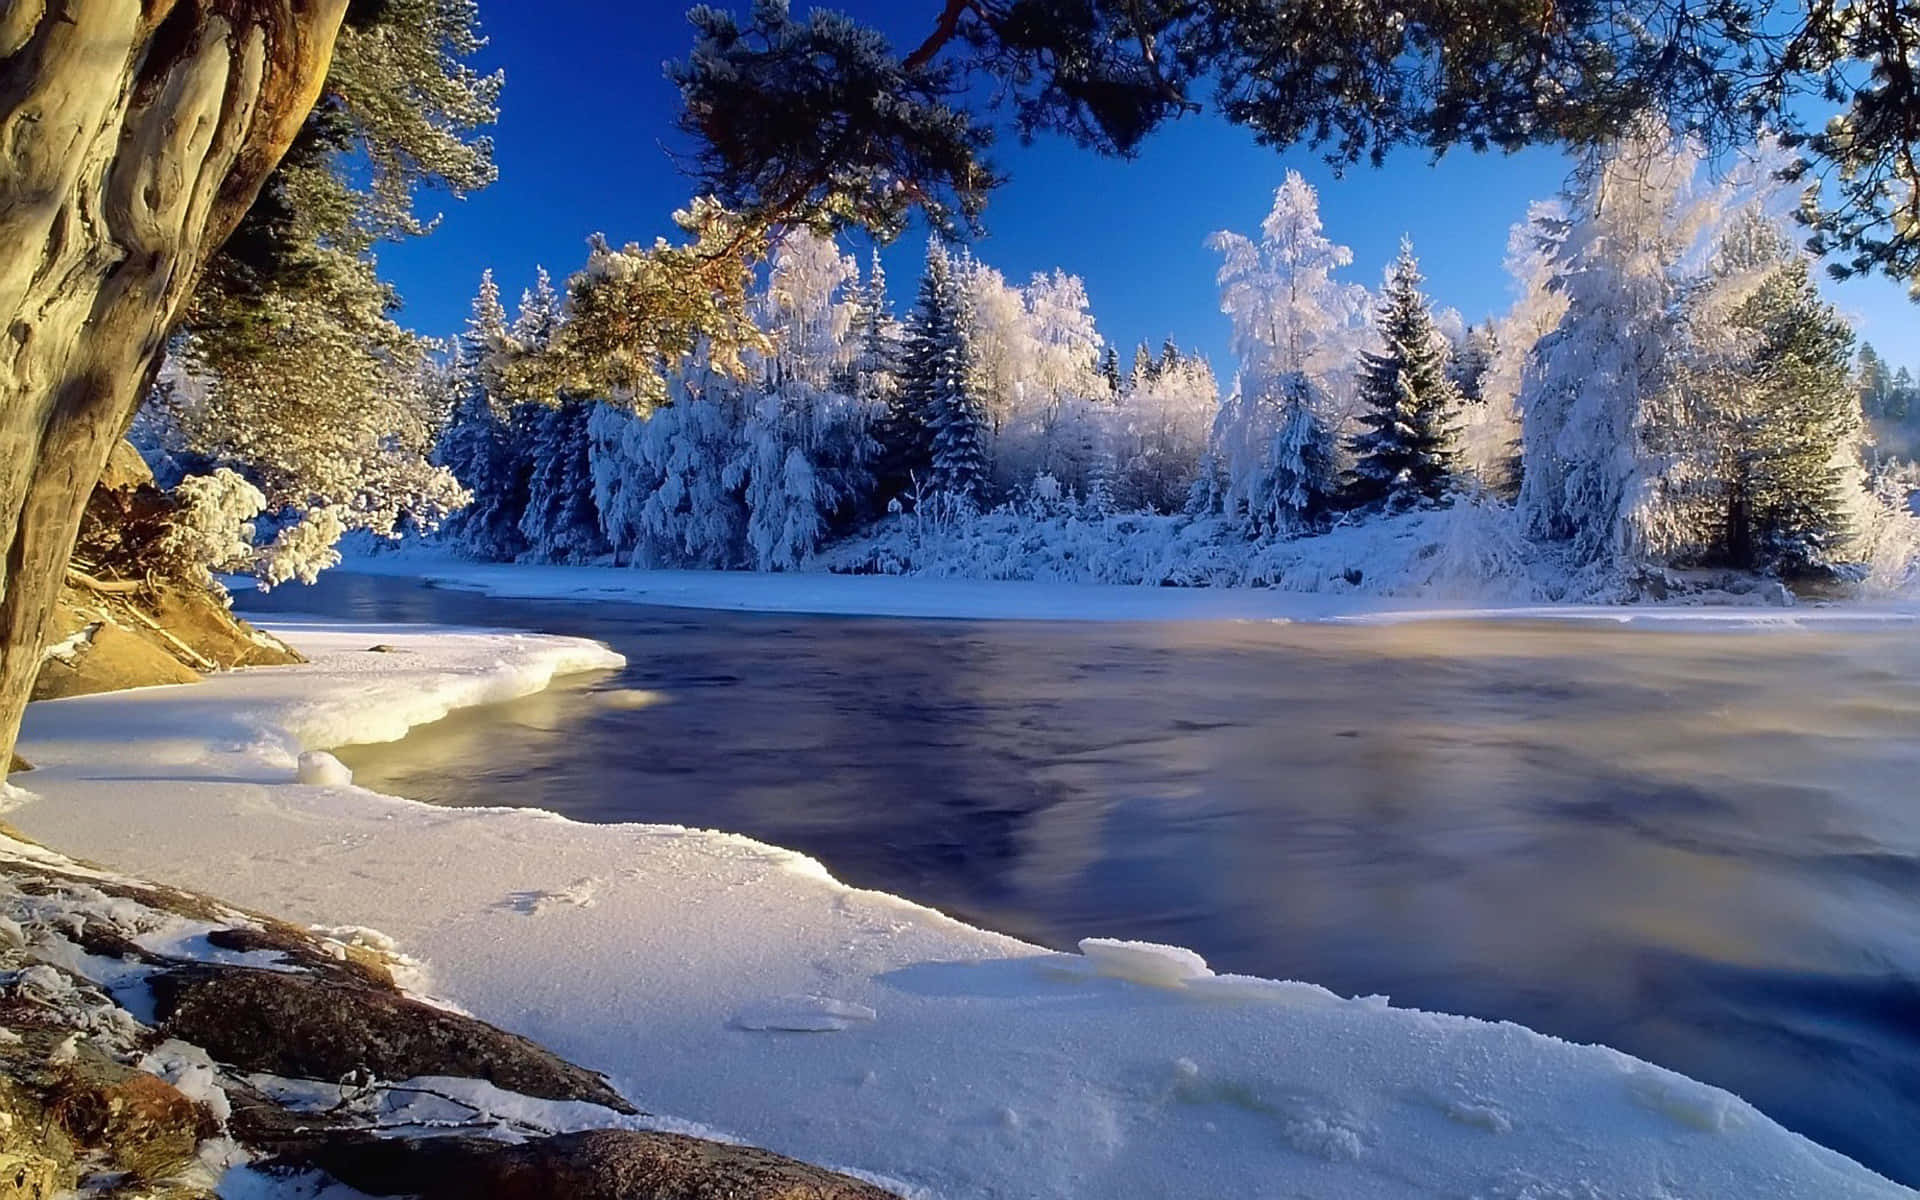 Icy River Screen Saver Picture